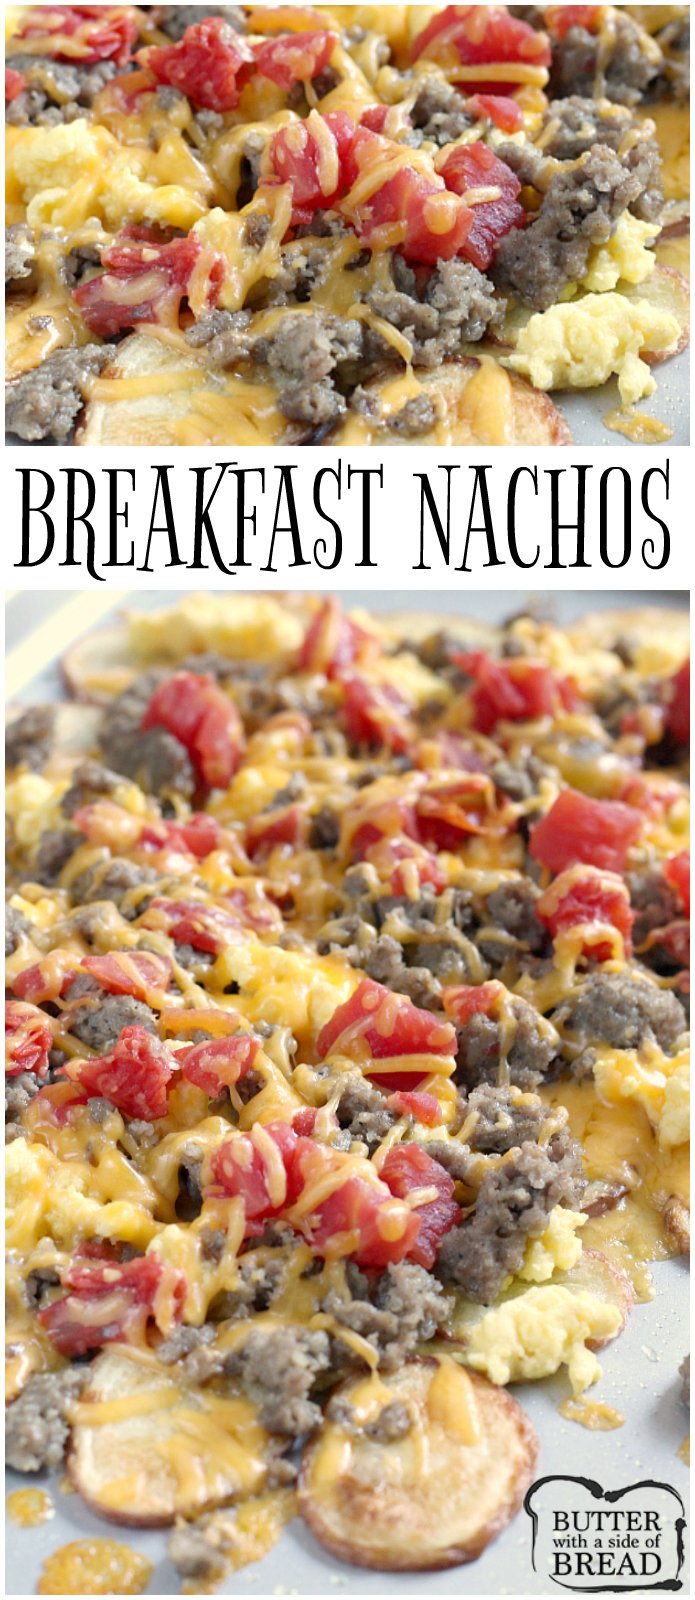 Easy Breakfast Nachos are perfect for breakfast, but also make a wonderful lunch or dinner too! Thinly sliced roasted potatoes topped with sausage, scrambled eggs, cheese and tomatoes - an easy meal that can be ready in 30 minutes!